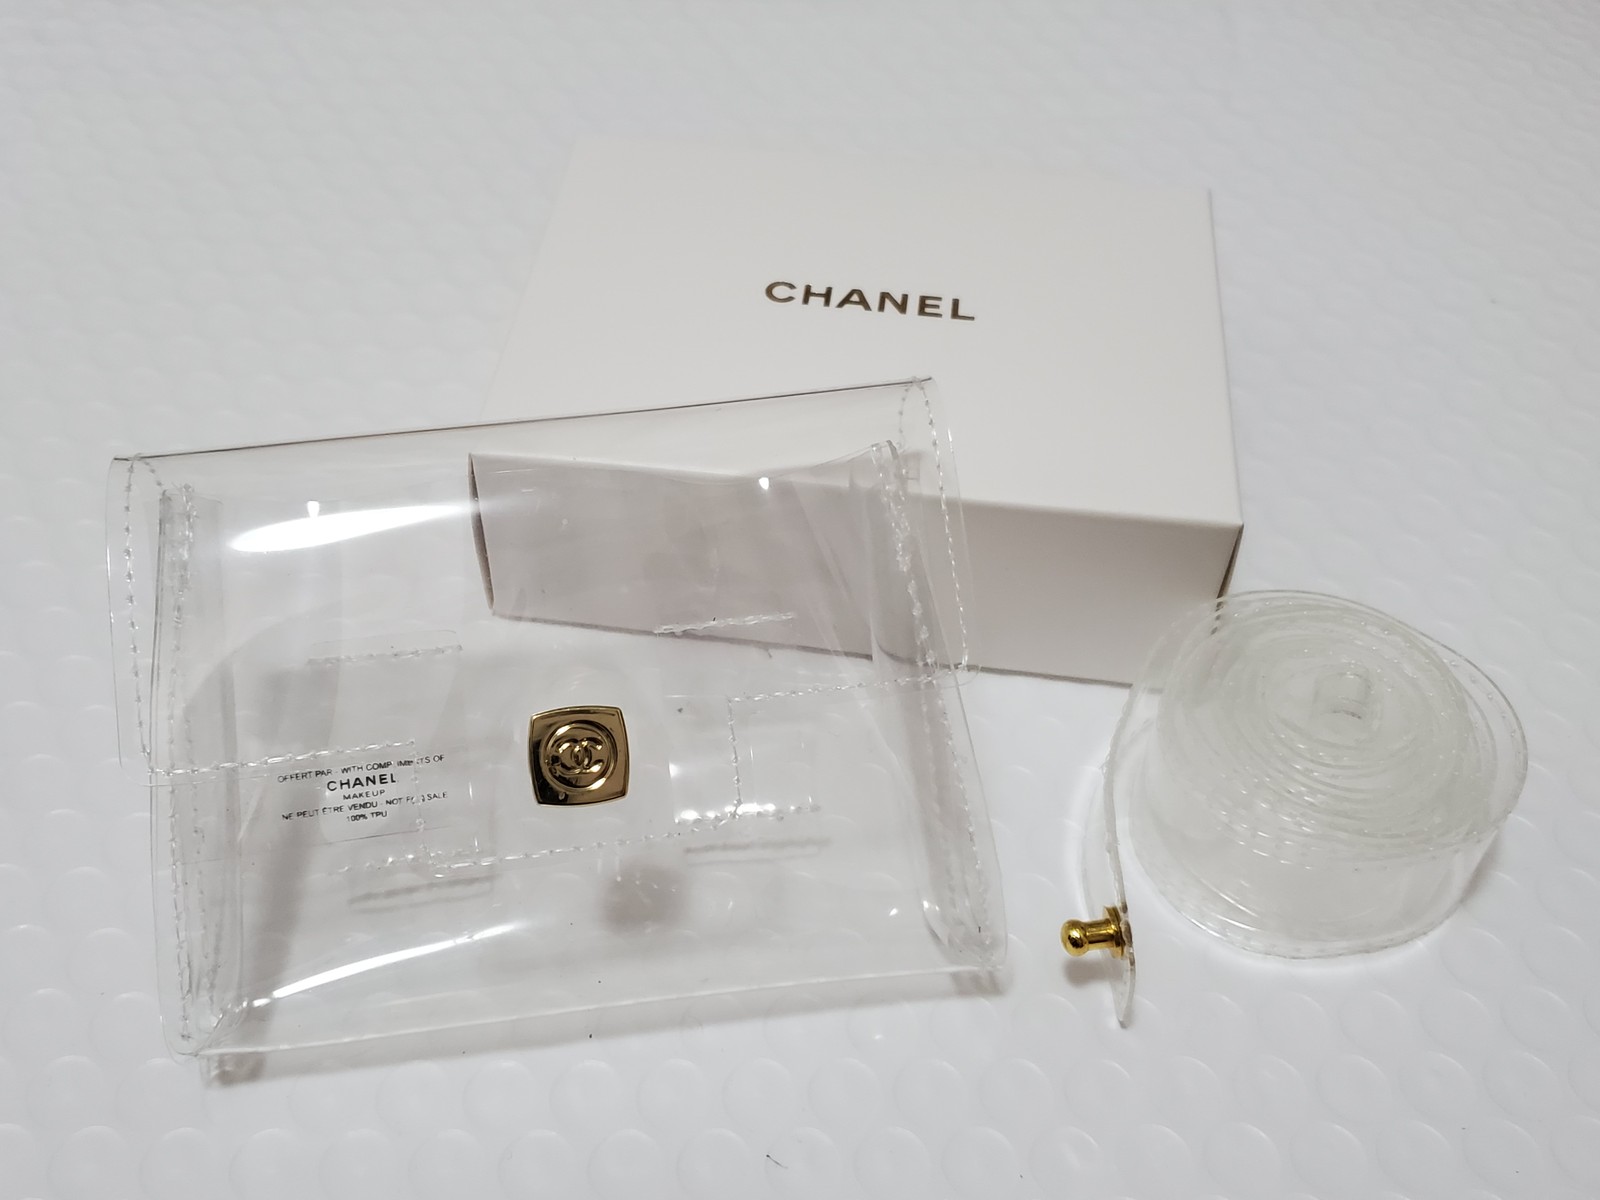 Chanel Makeup Transparent Small Size PVC Waist Bag w/ Belt VIP Gift New in Box